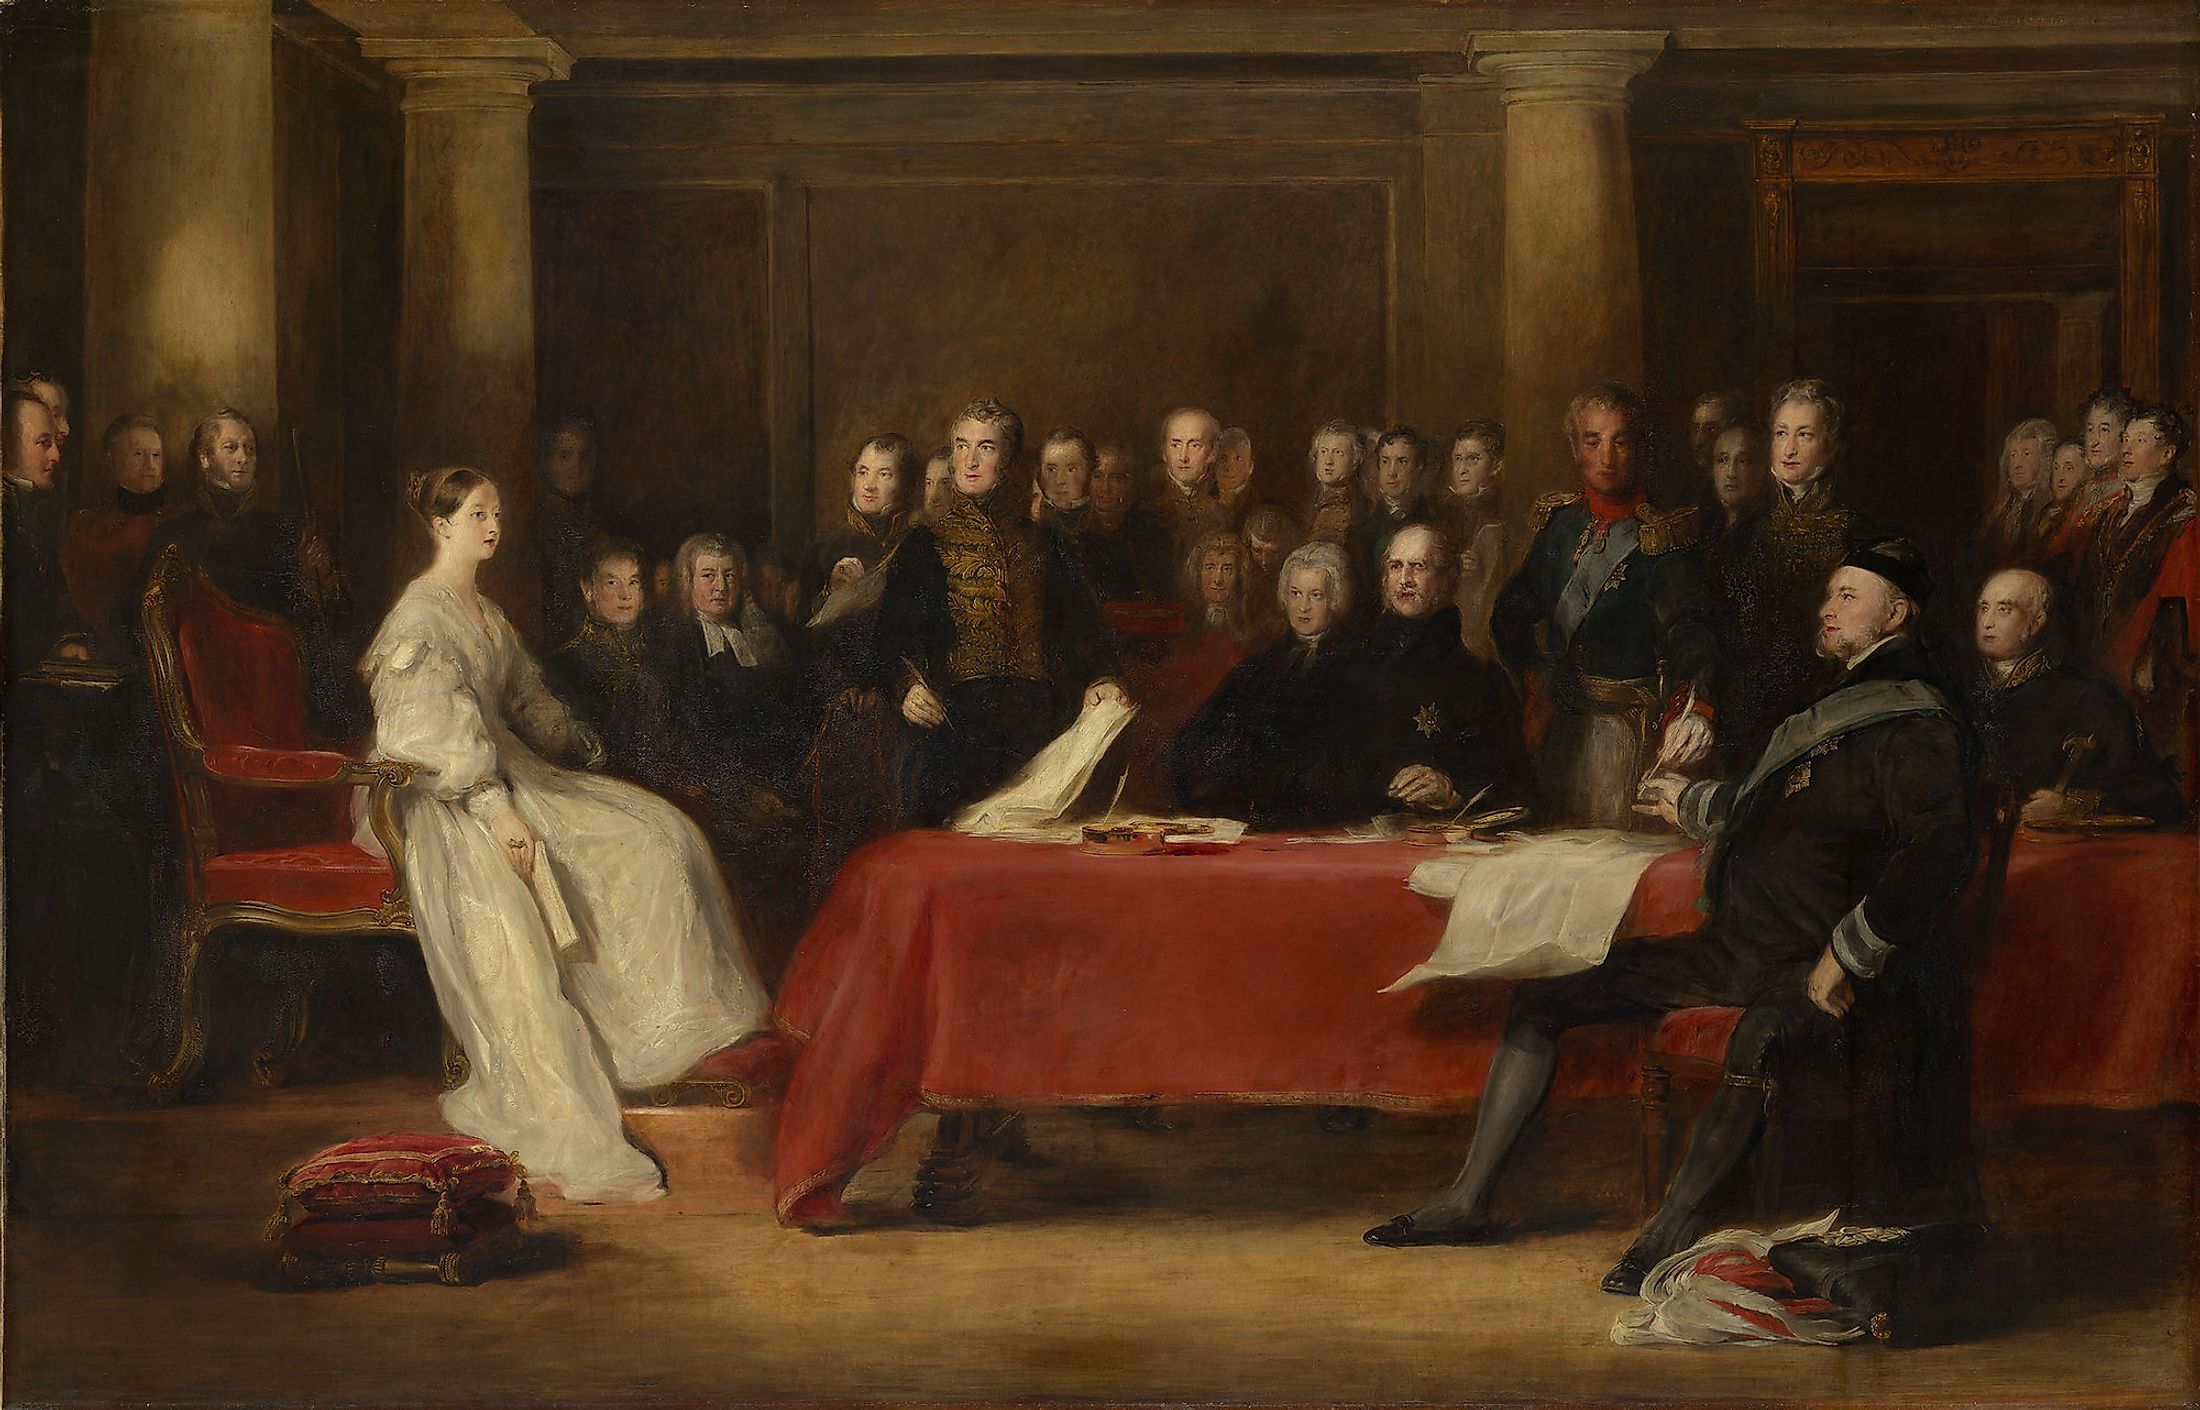 The First Council of Queen Victoria. Image credit David Wilkie via Wikimedia Commons